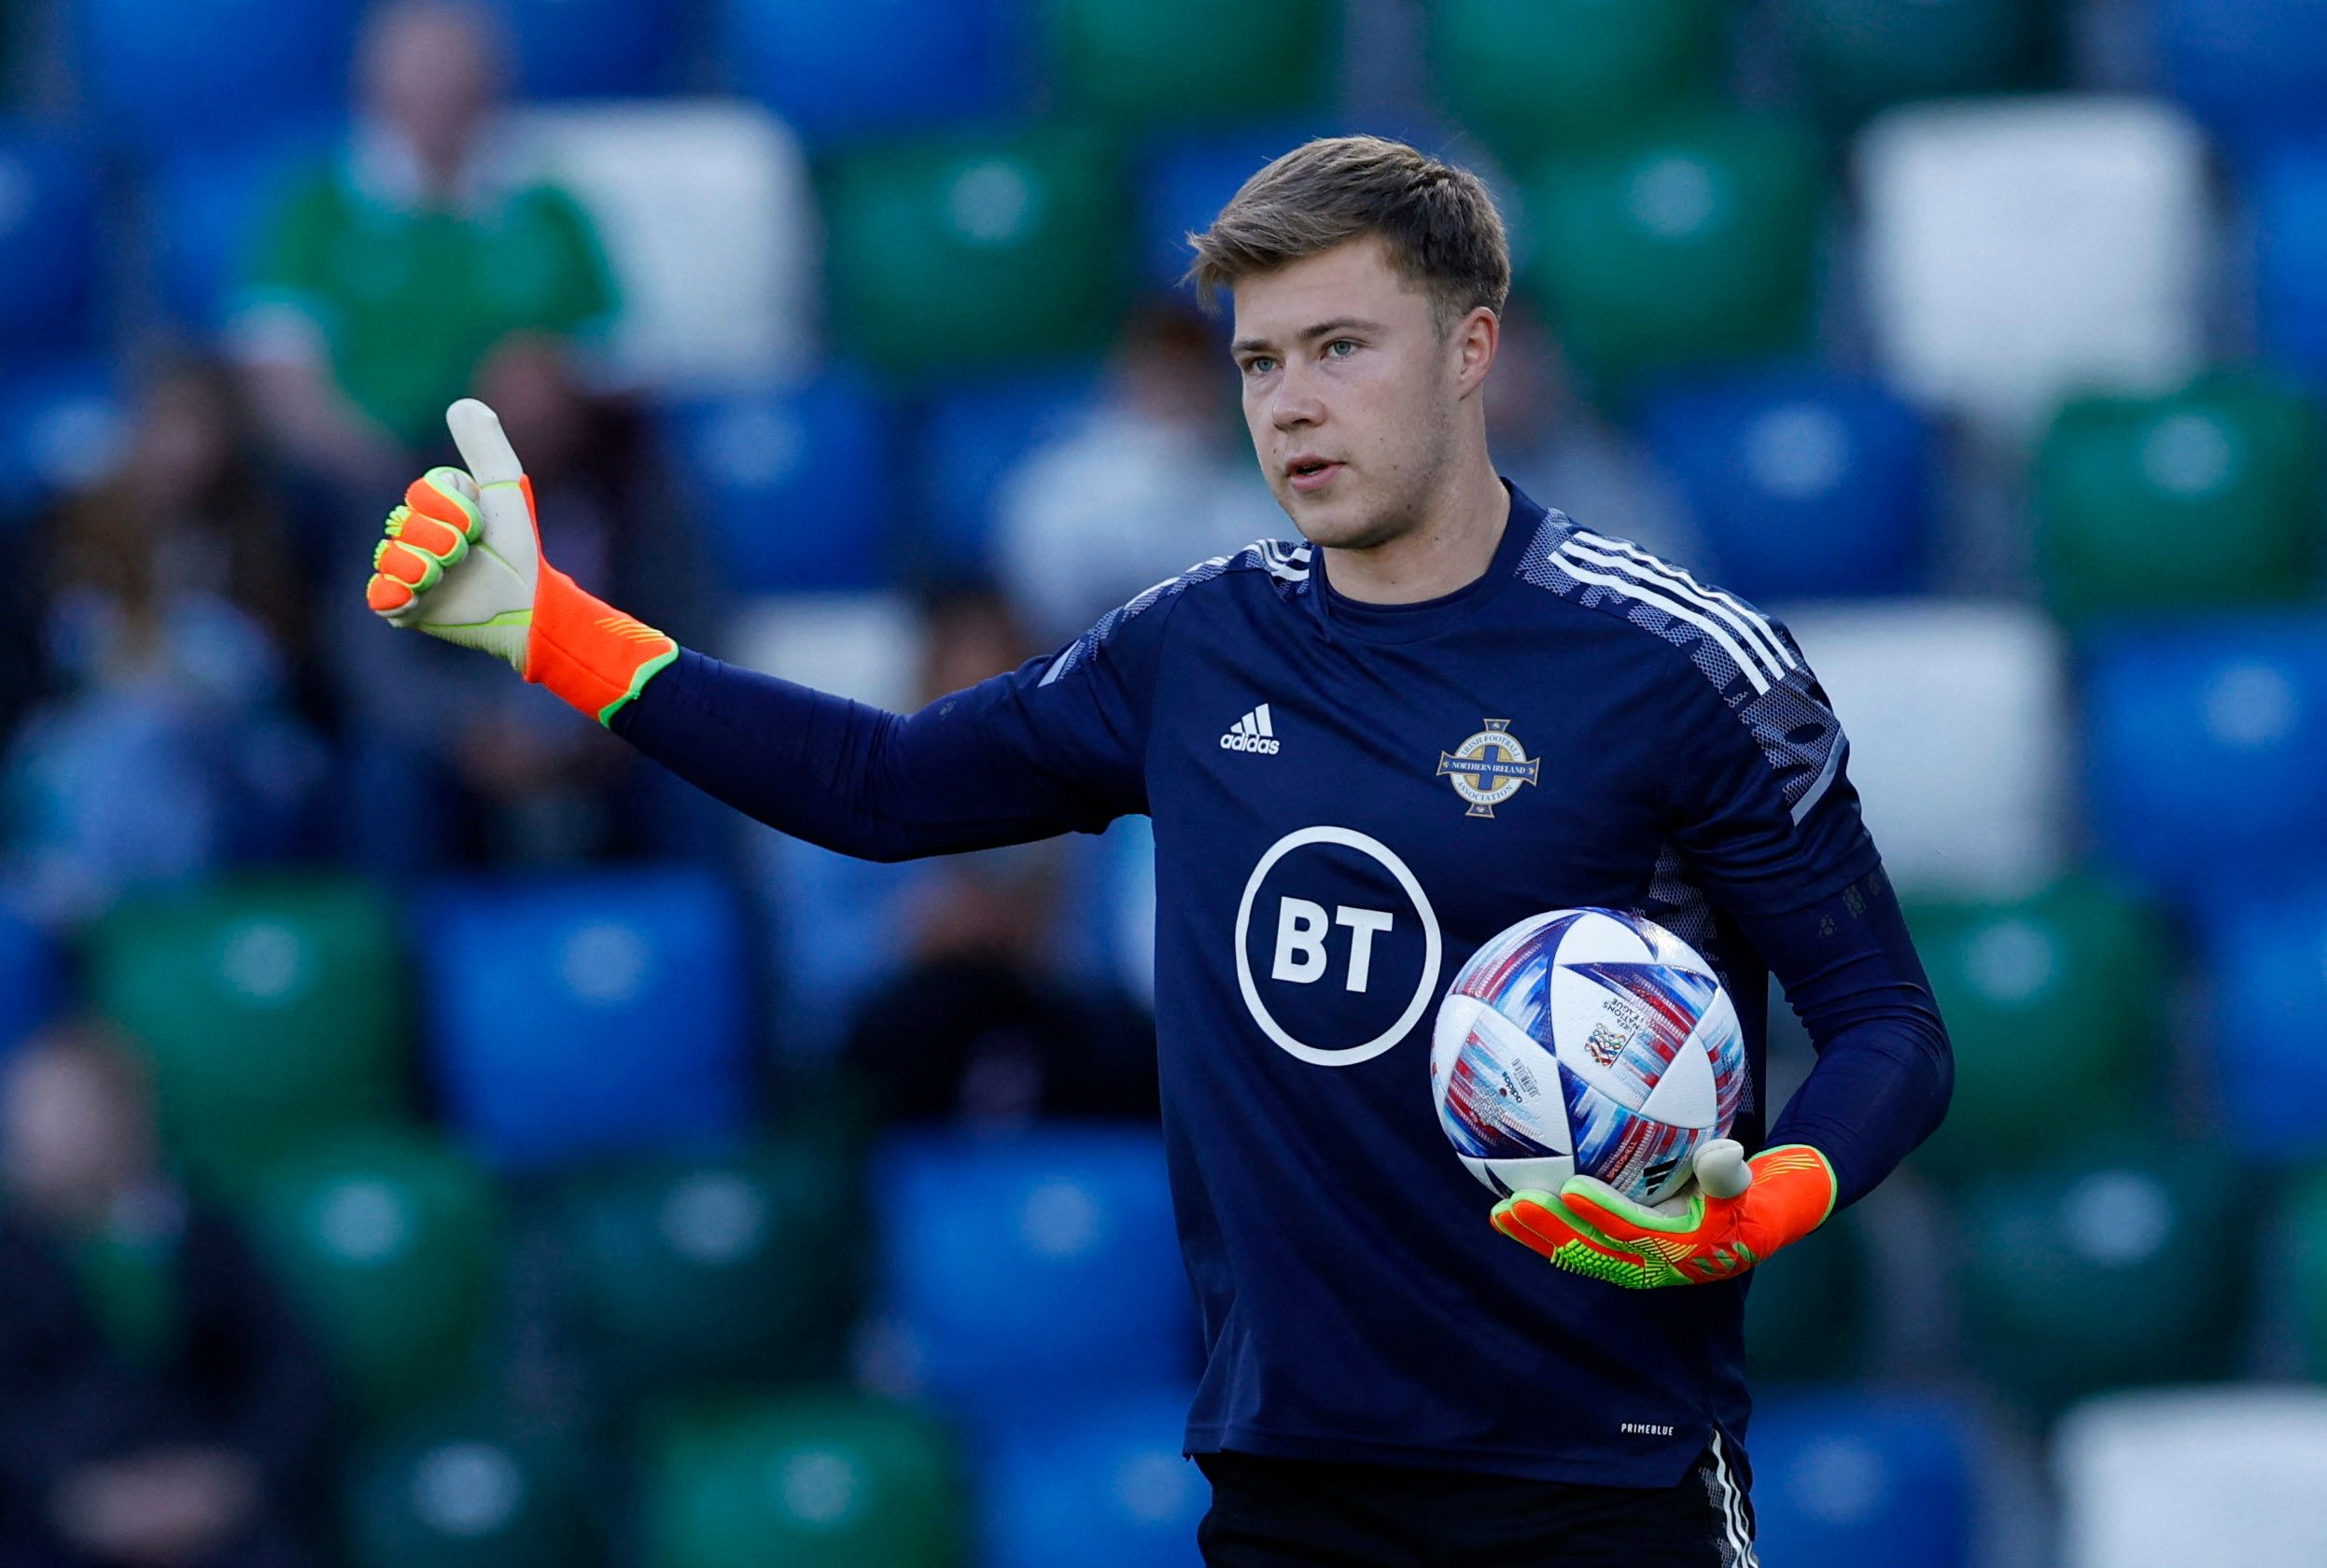 Soccer Football - UEFA Nations League - Group J - Northern Ireland v Kosovo - Windsor Park, Belfast, Northern Ireland, Britain - September 24, 2022 Northern Ireland's Bailey Peacock-Farrell during the warm up before the match REUTERS/Jason Cairnduff